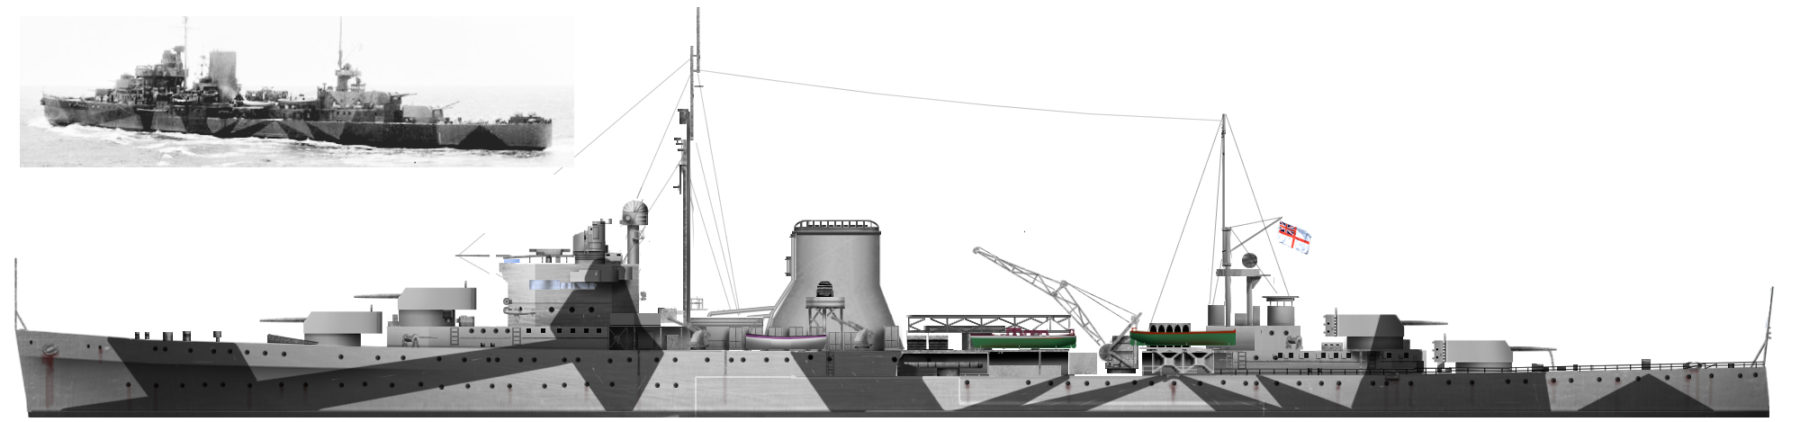 HMS leander in 1942 - Author's HD illustration